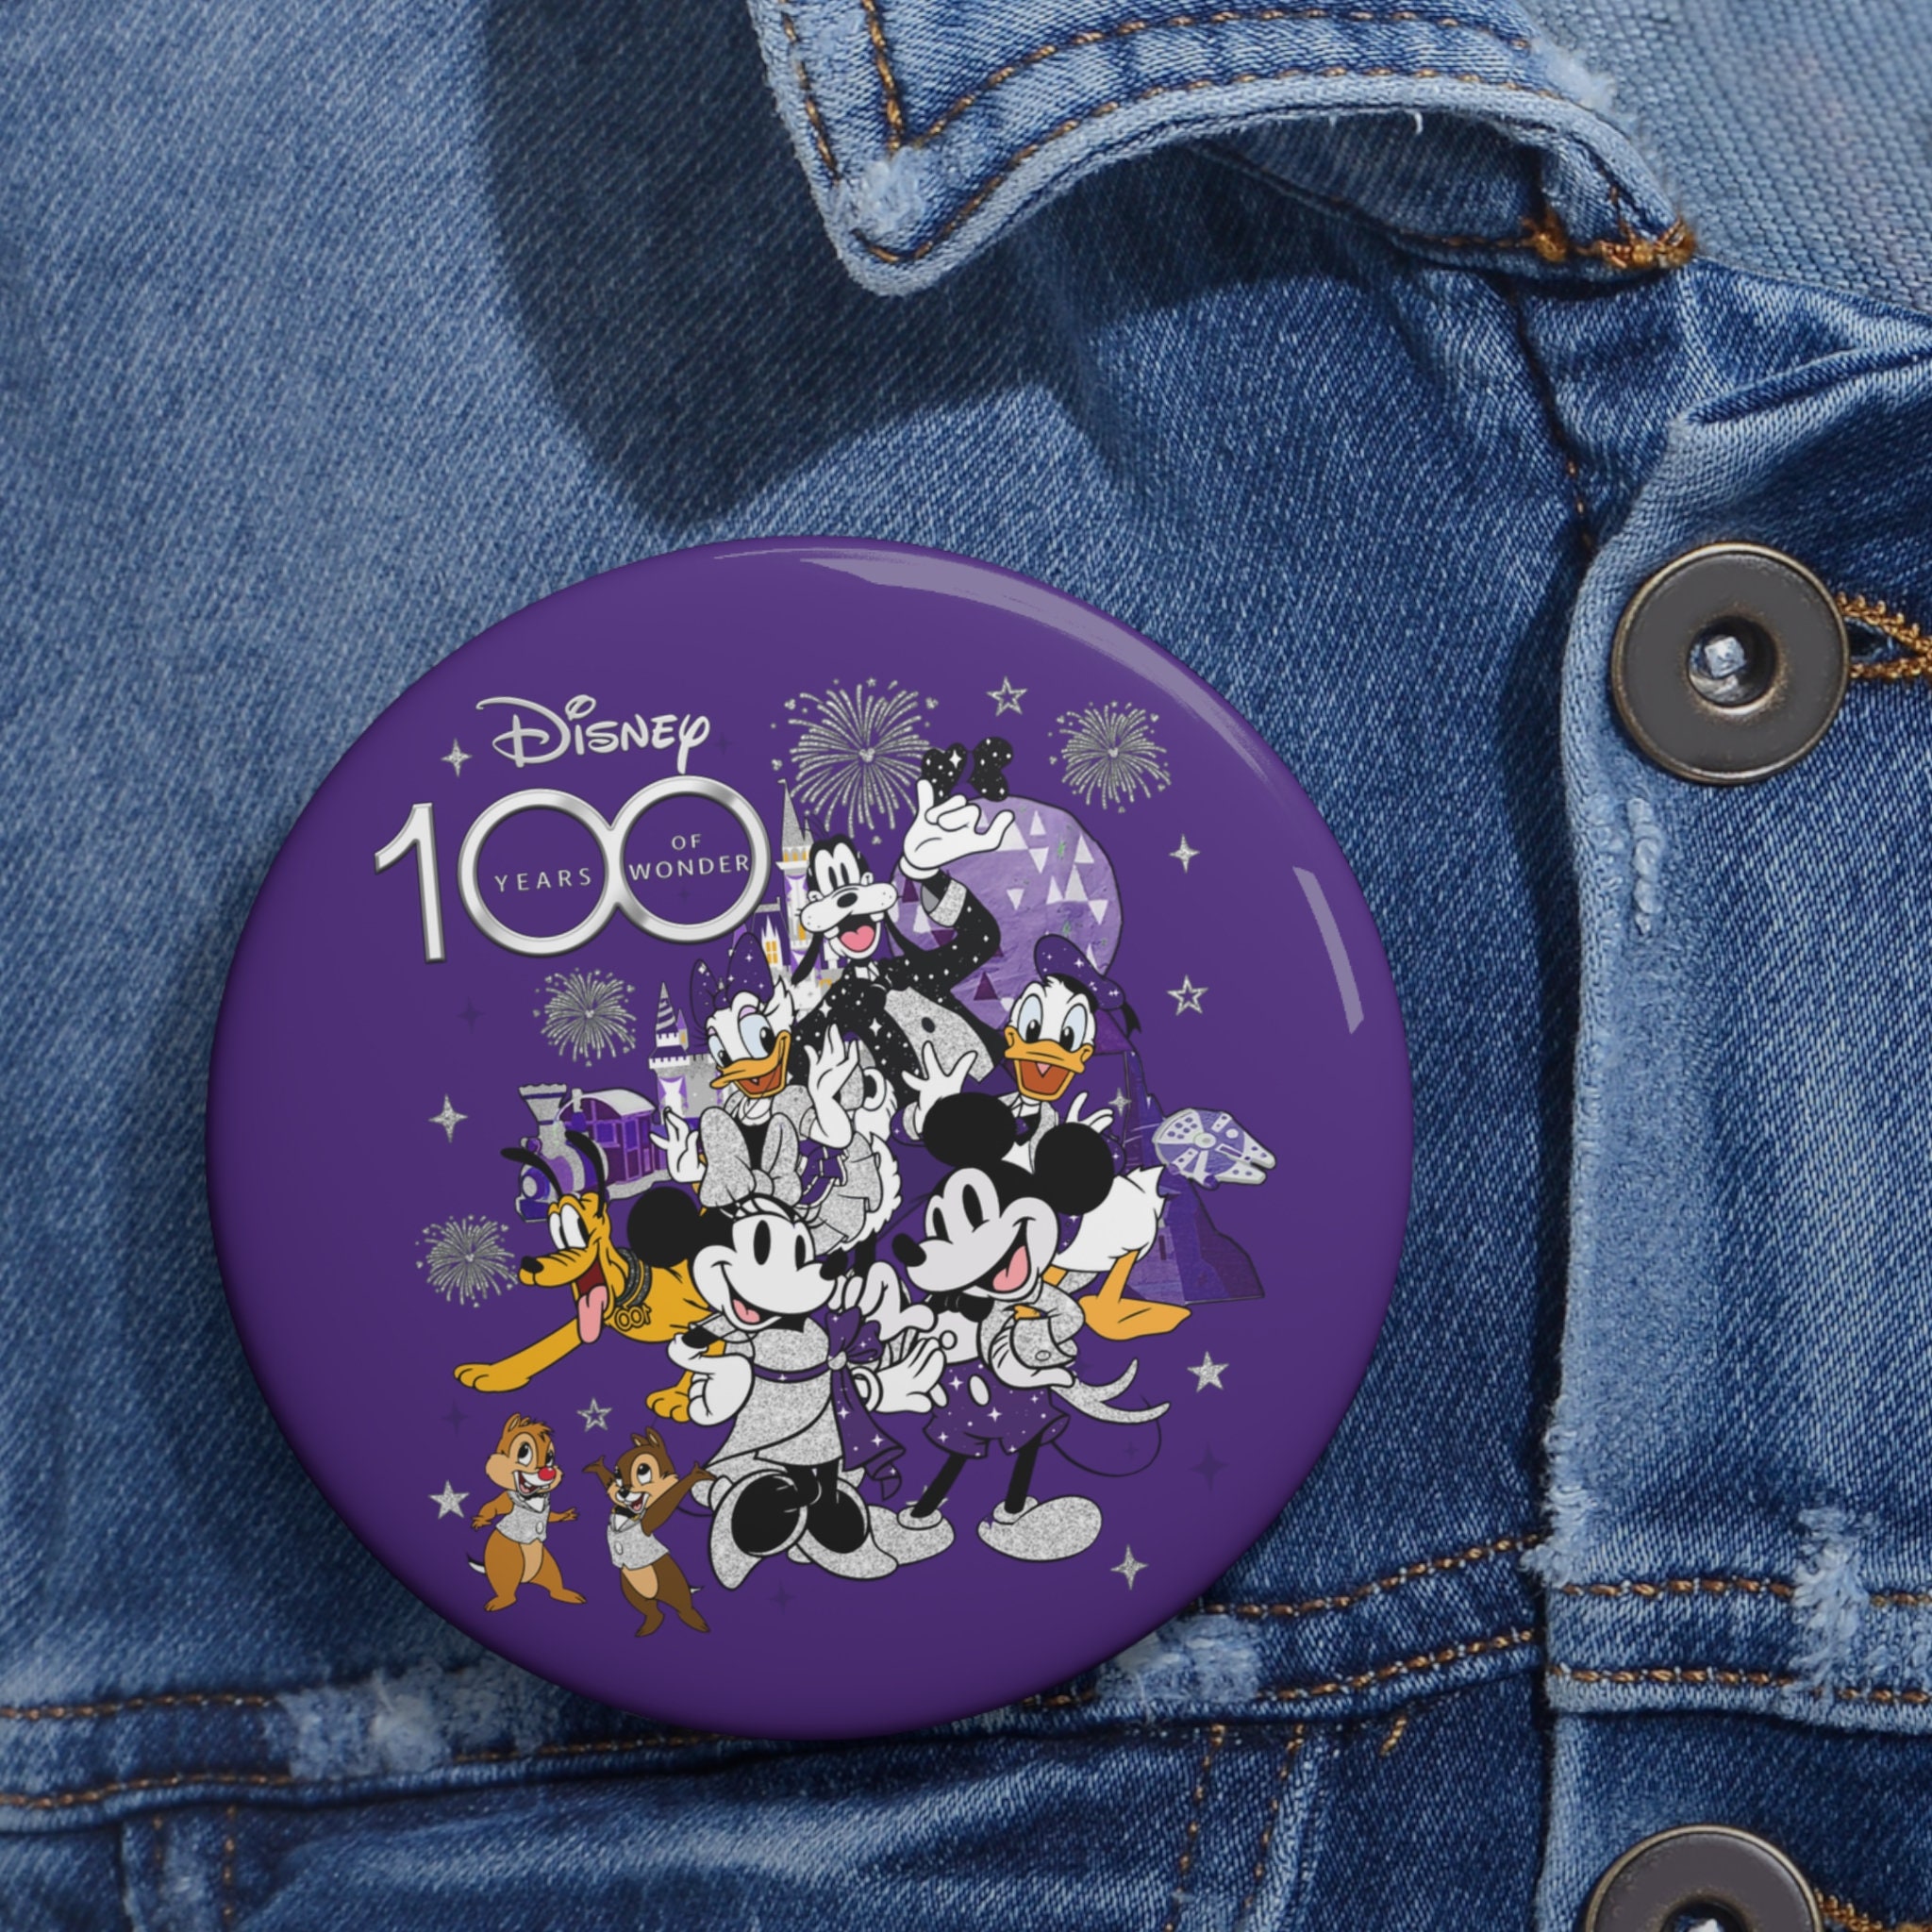 Disneyland Buttons, Disney 100 Years of Wonder Pin, Mickey and Friends 100th Pin Button